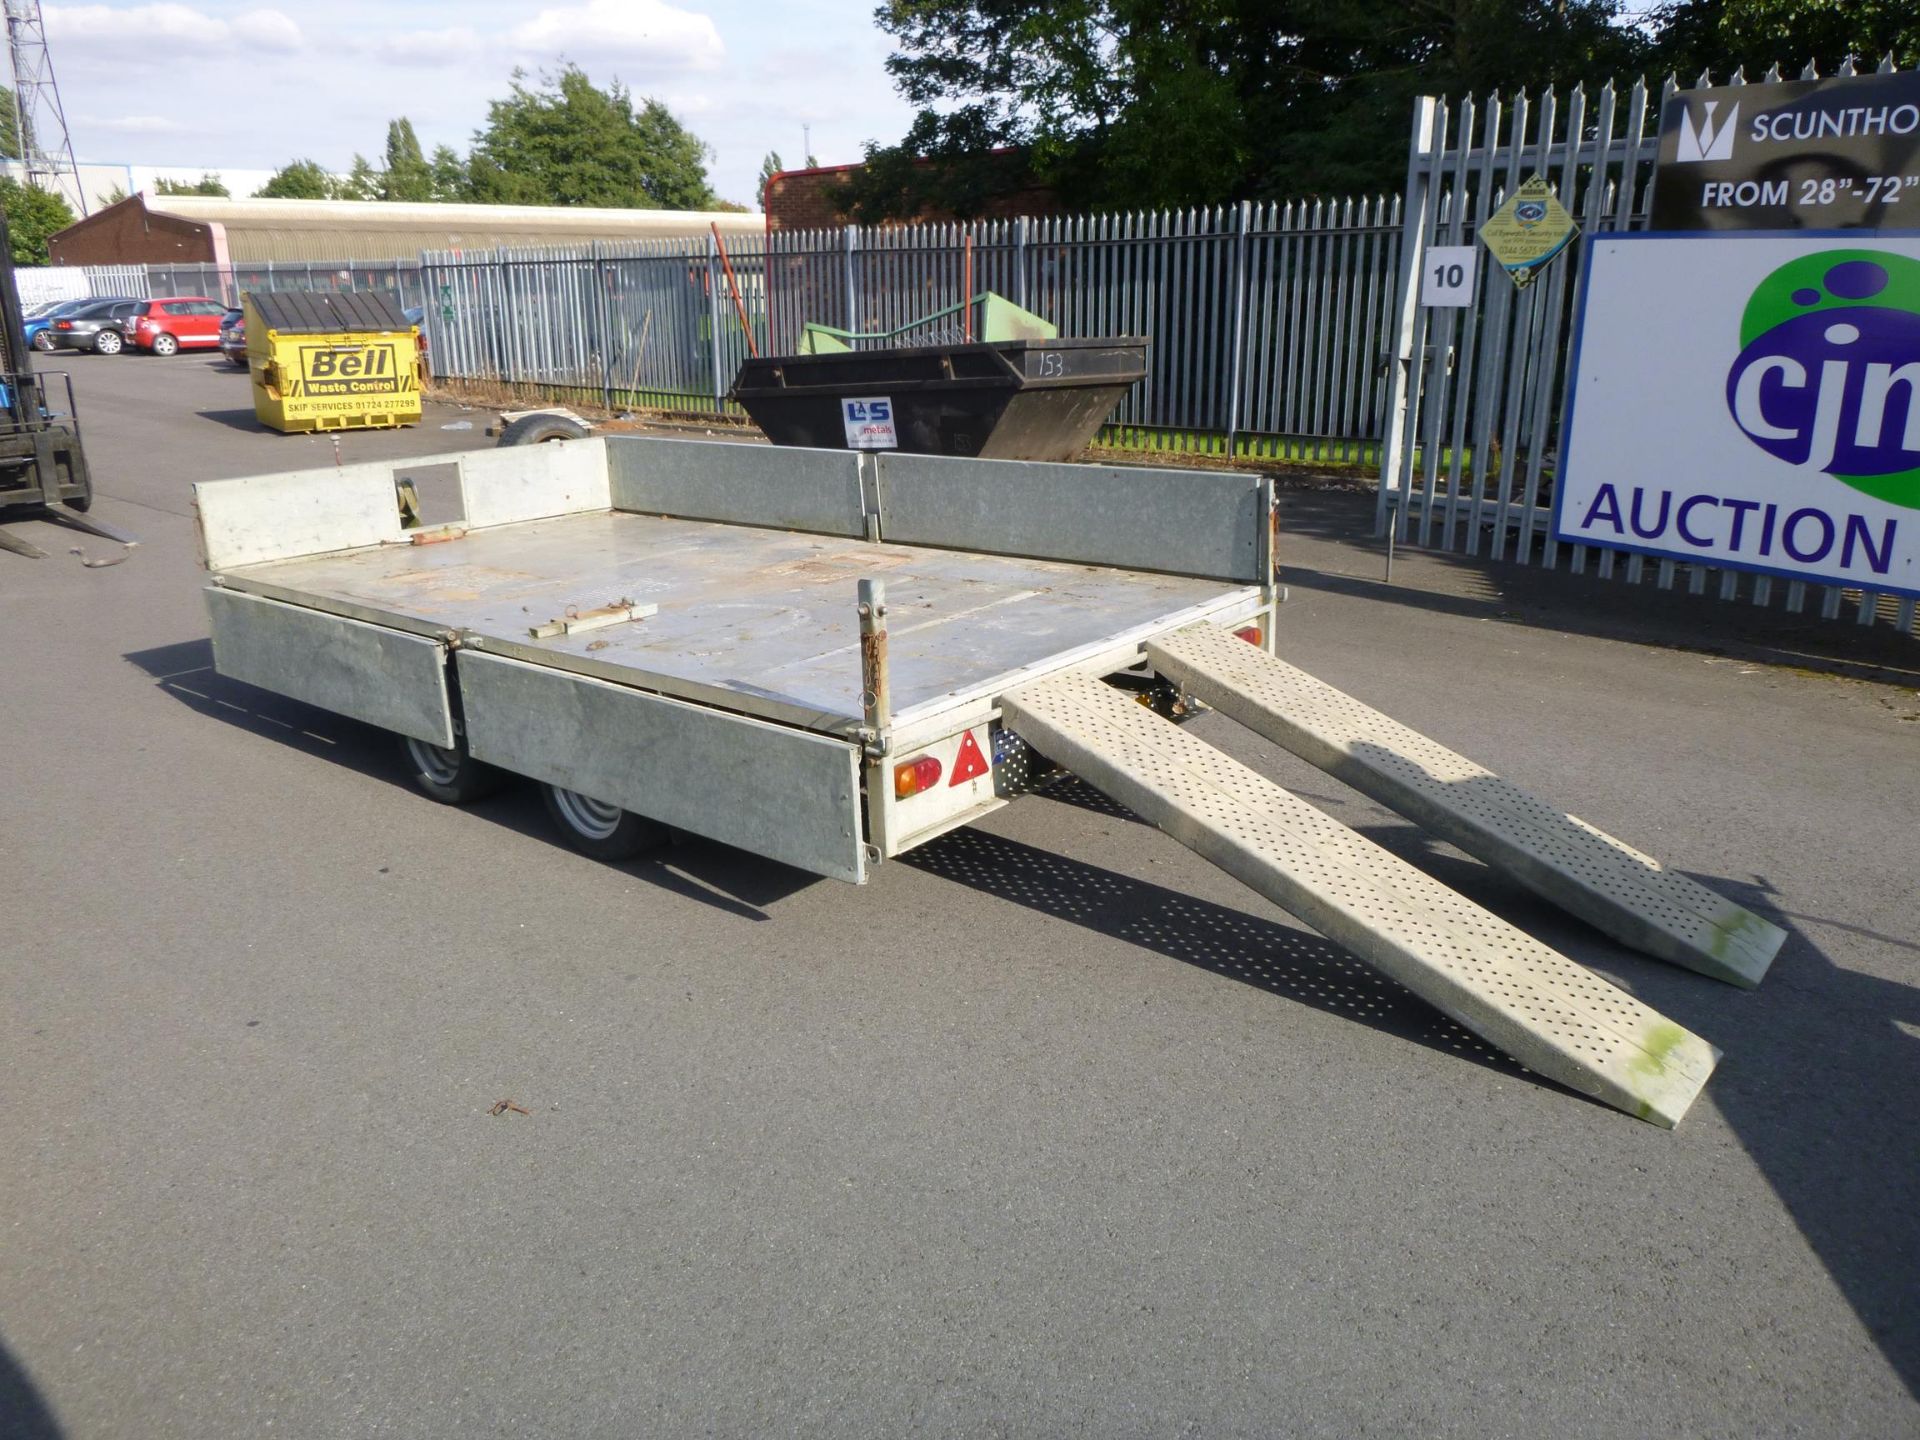 An Ifor Williams Twin Axle Galvanised Trailer Braked, 12V electrics,Ratchet Hand Winch, Rear legs